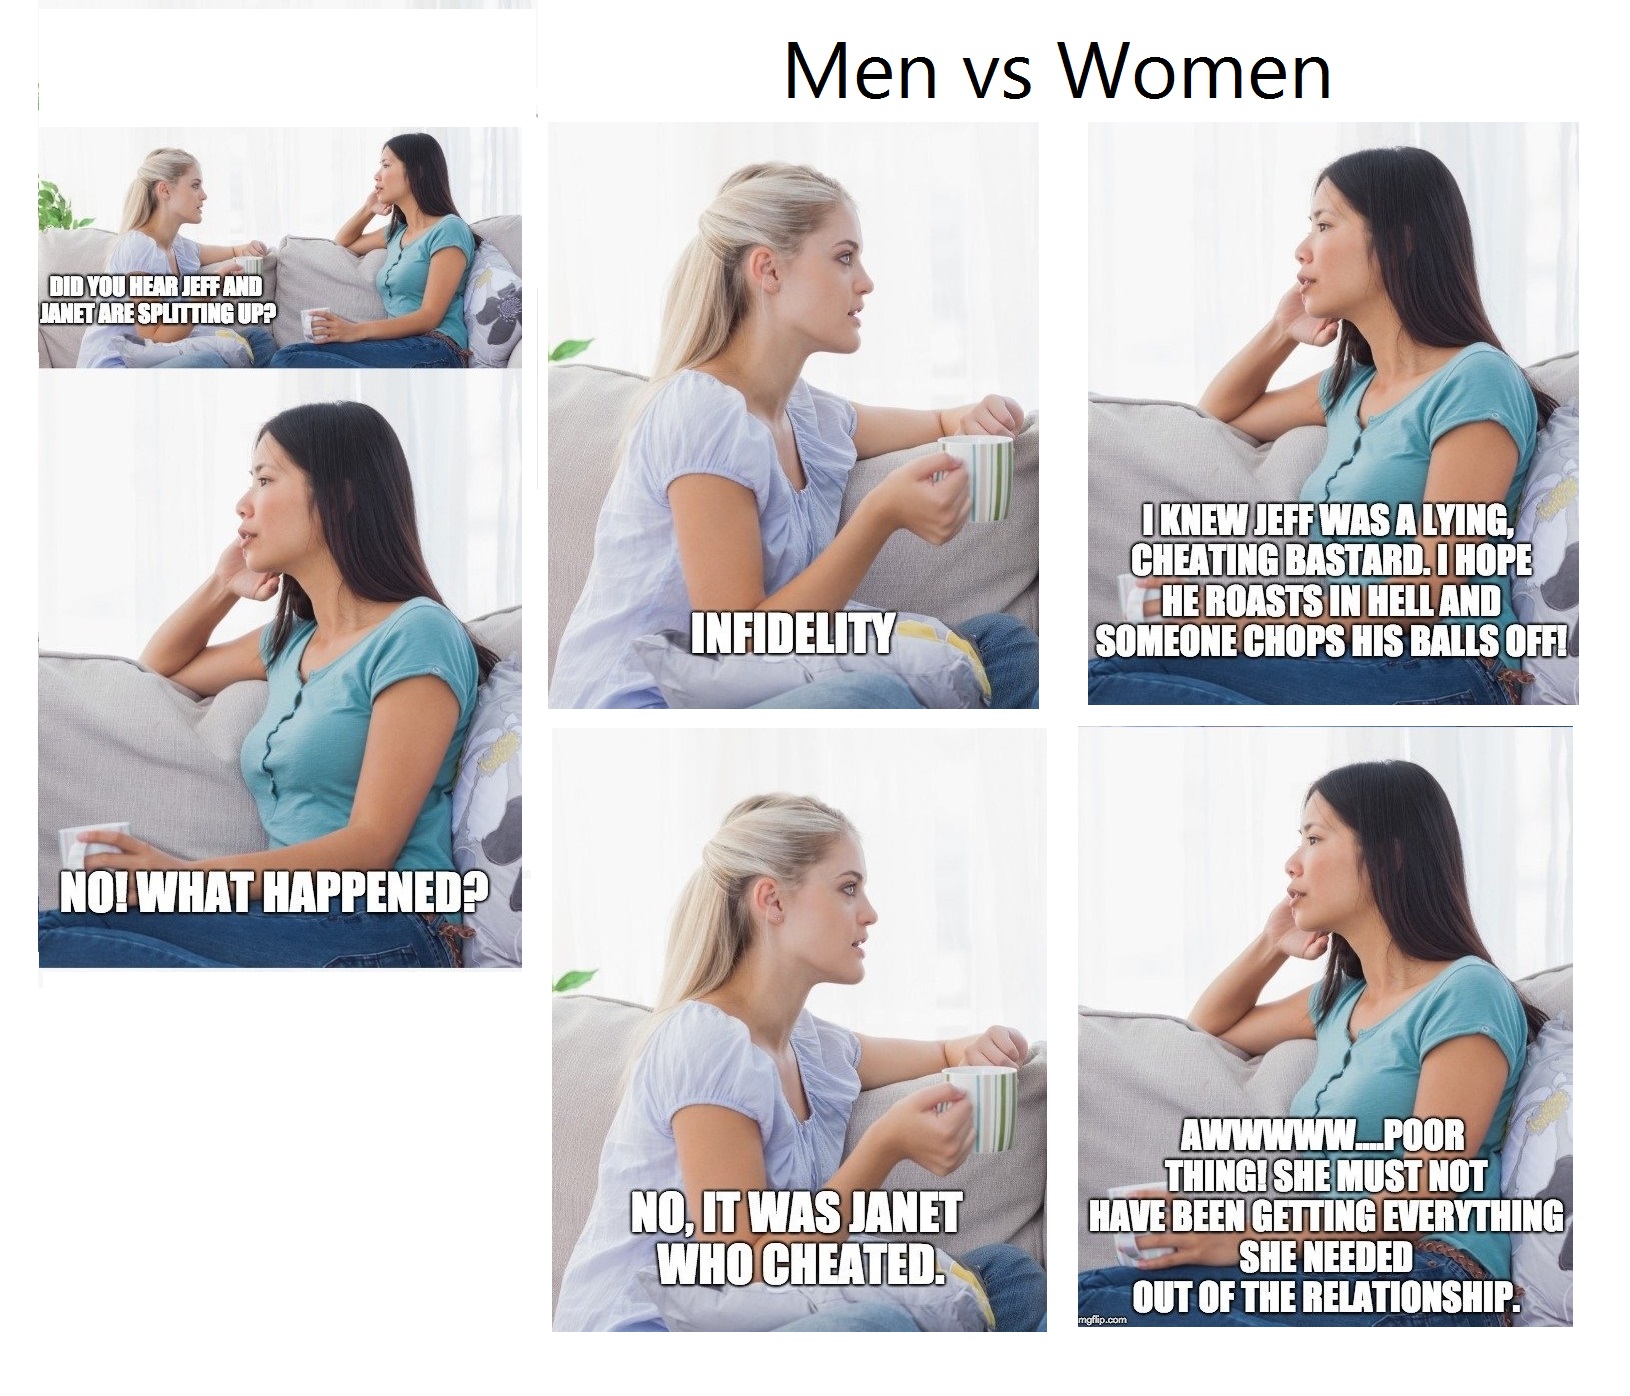 memes - sitting - Men vs Women Did You Hear Jeff And Janetare Shutting P2 I Knew Jeff Was A Lying, Cheating Bastard. I Hope He Roasts In Hell And Someone Chops His Balls Offi Infidelity Noi What Happened? No, It Was Janet Who Cheated AWWWWW_POOR Thingi Sh